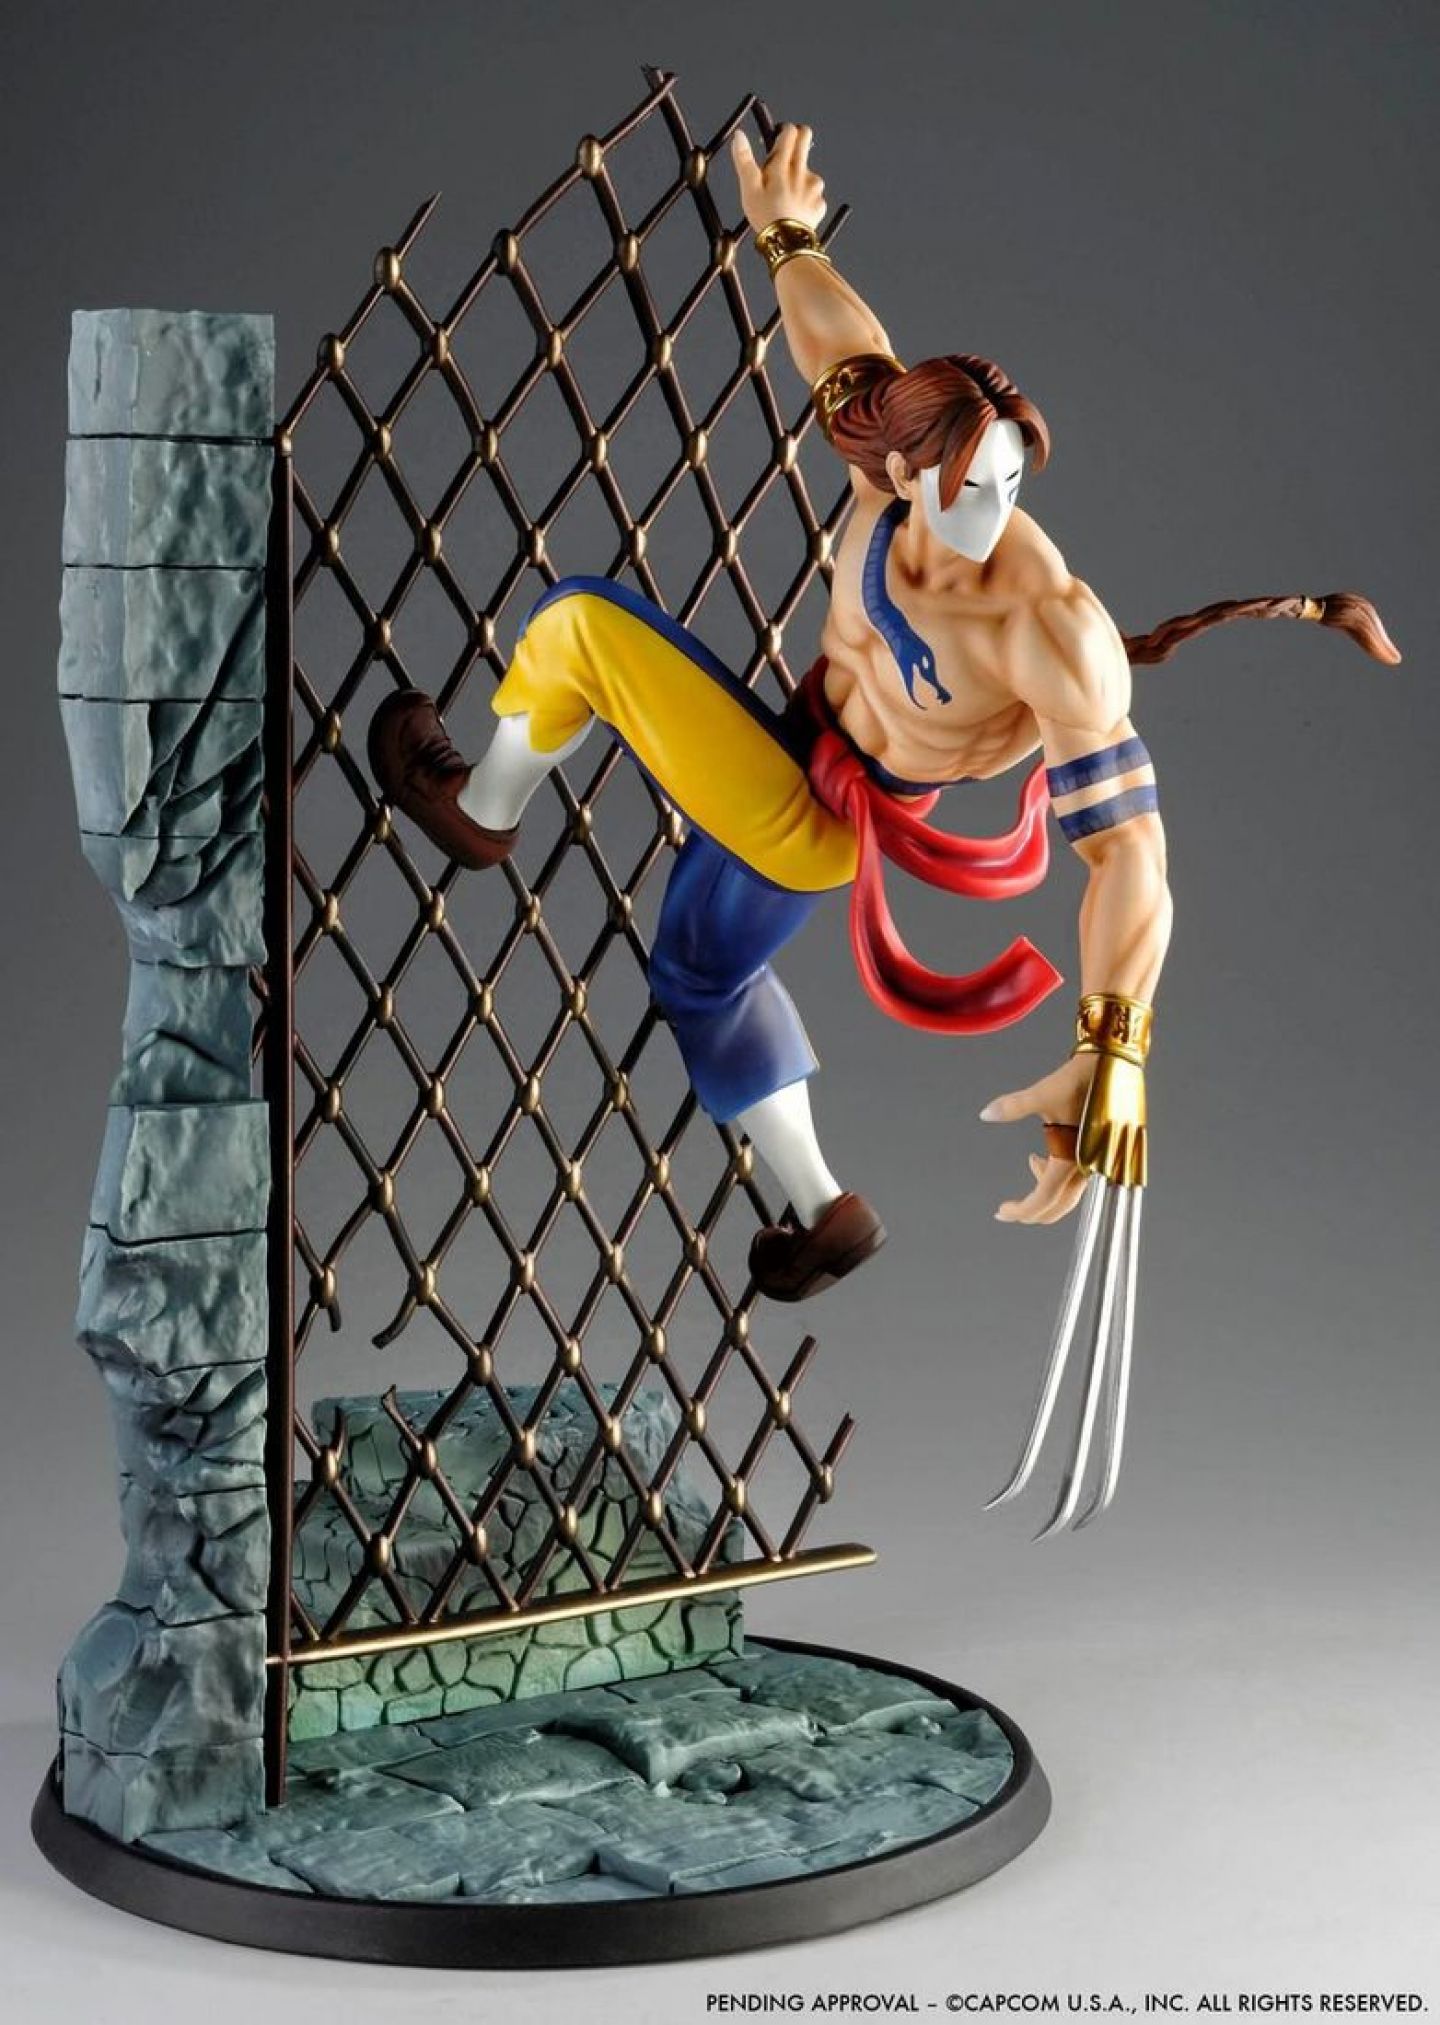 Vega (Street Fighter) – Time to collect